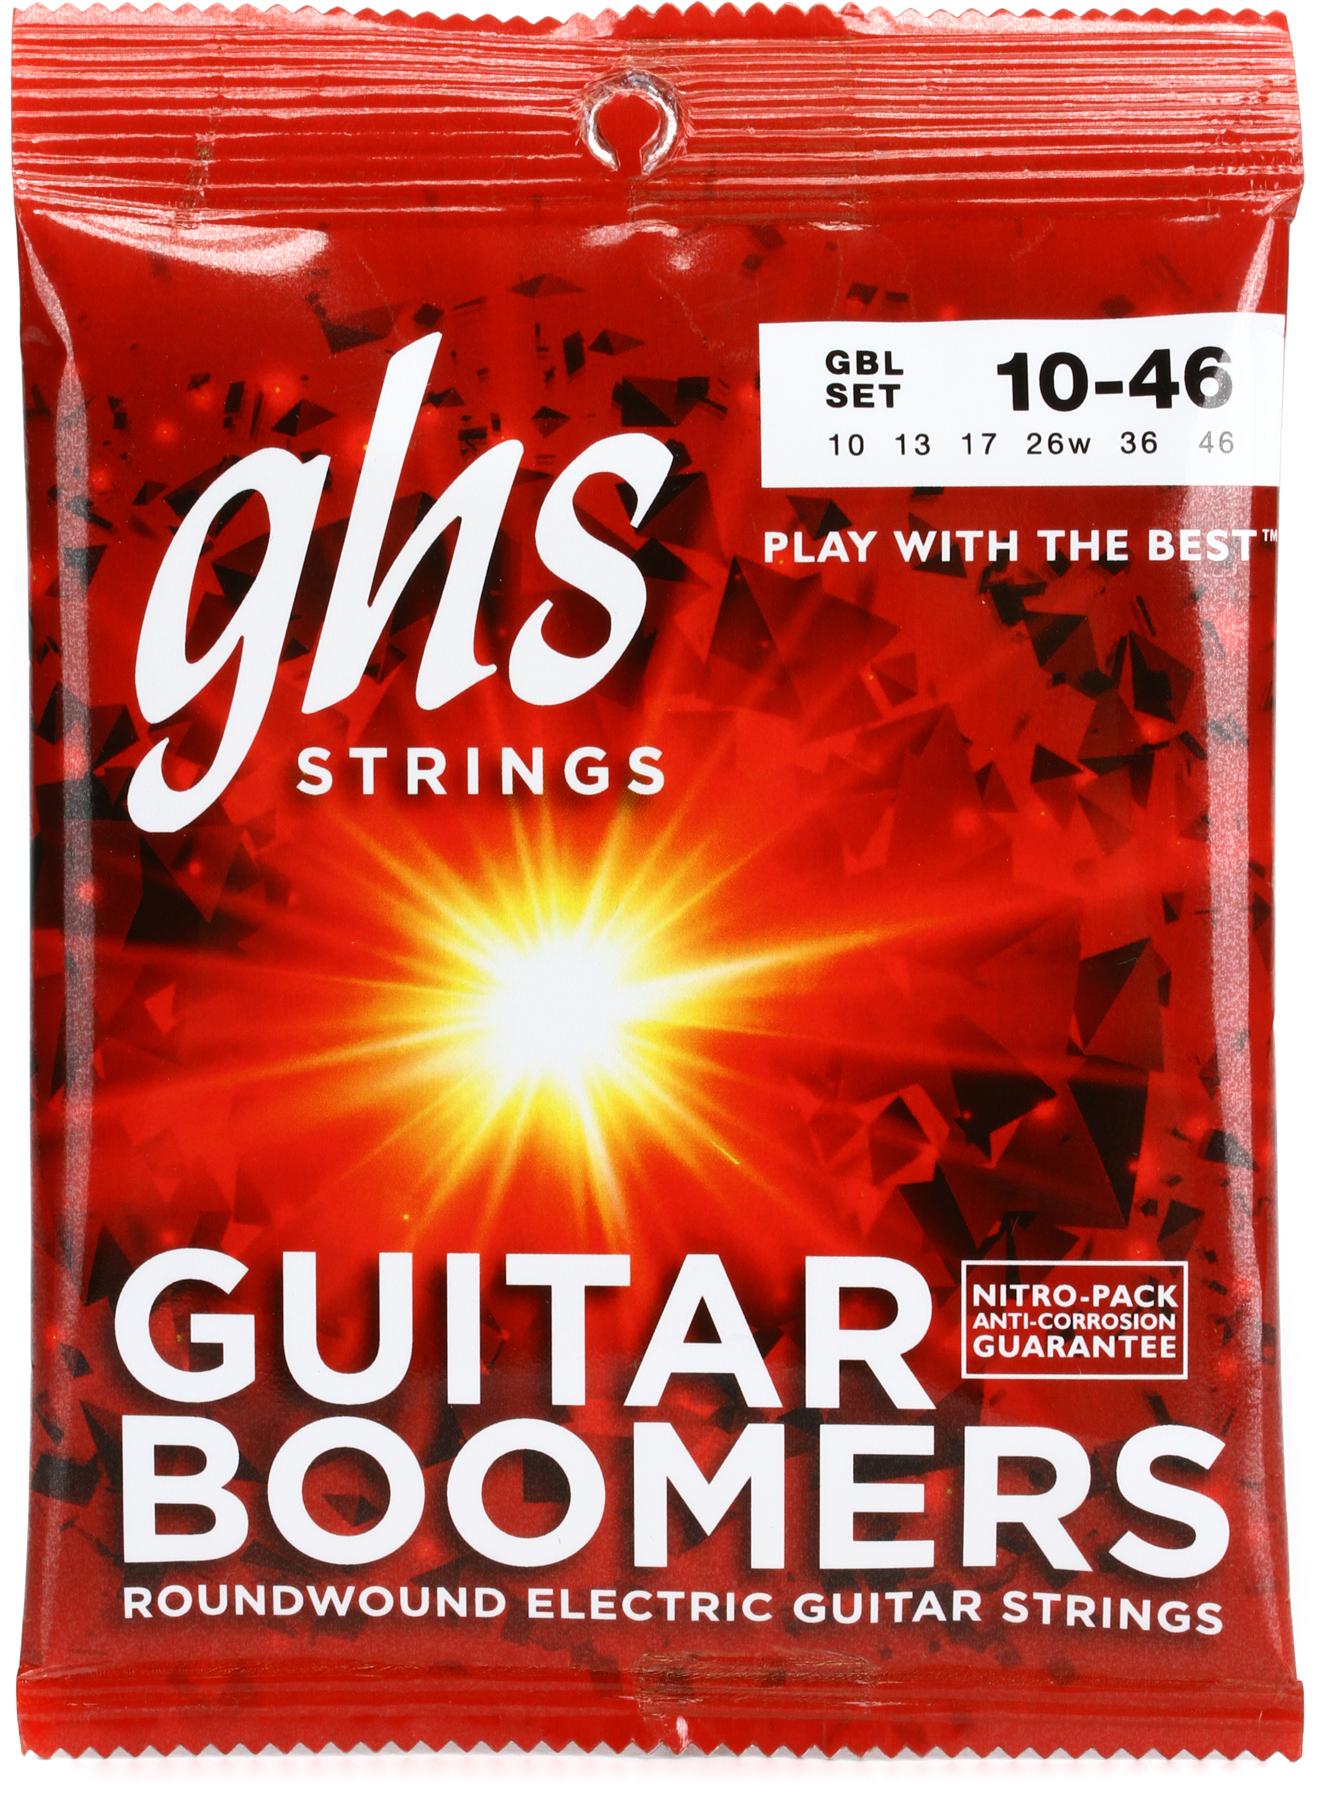 5. GHS Boomers